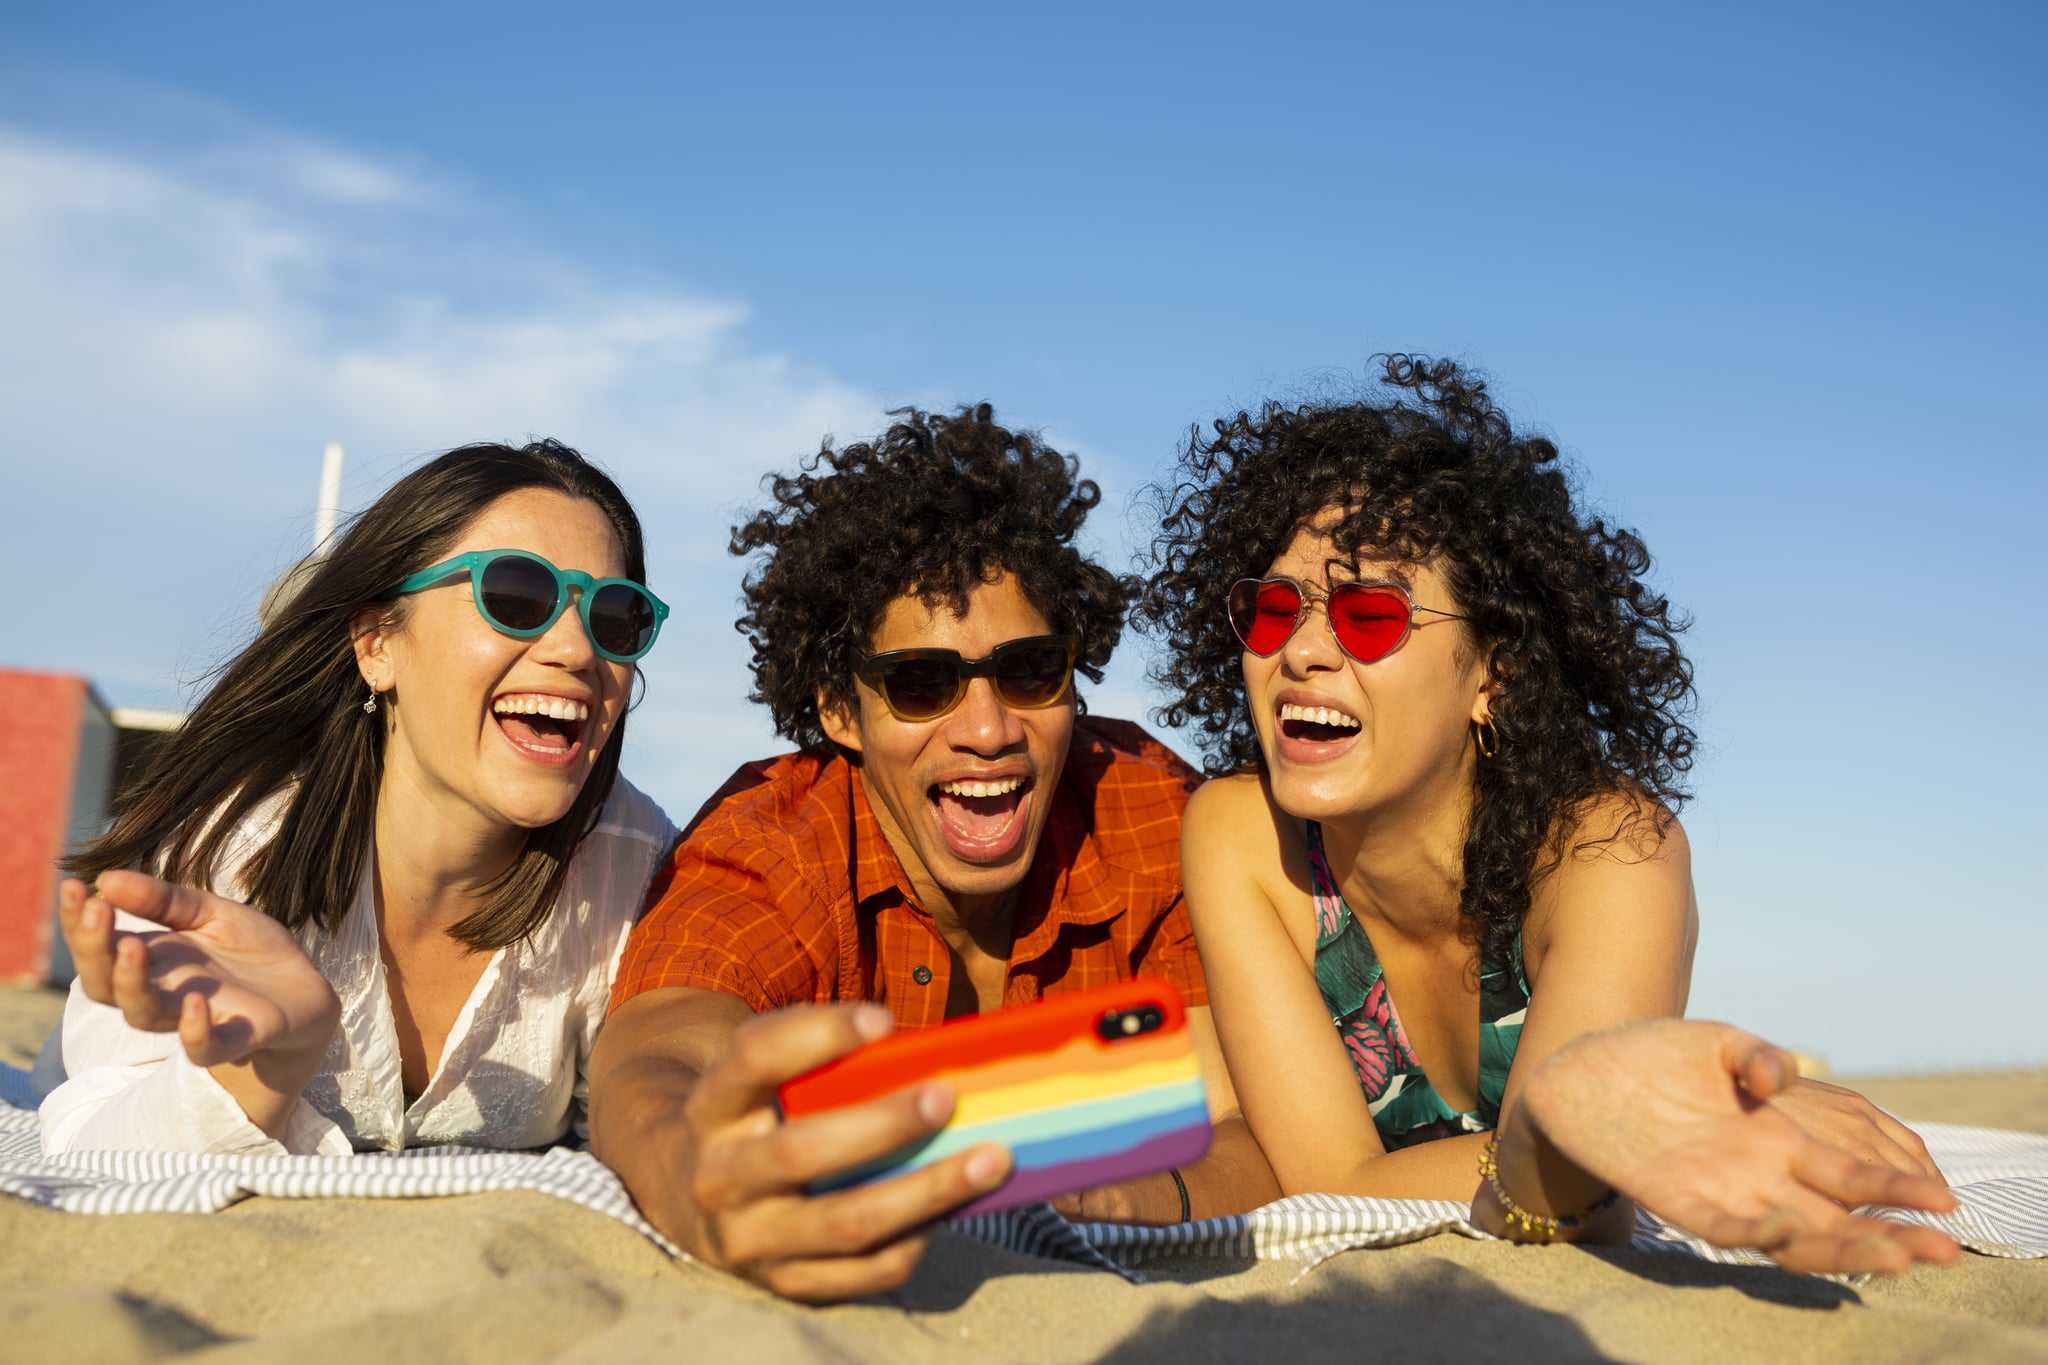 Group of multi ethnic friends, two women and a man, taking a selfie with an smartphone and hanging out at the beach